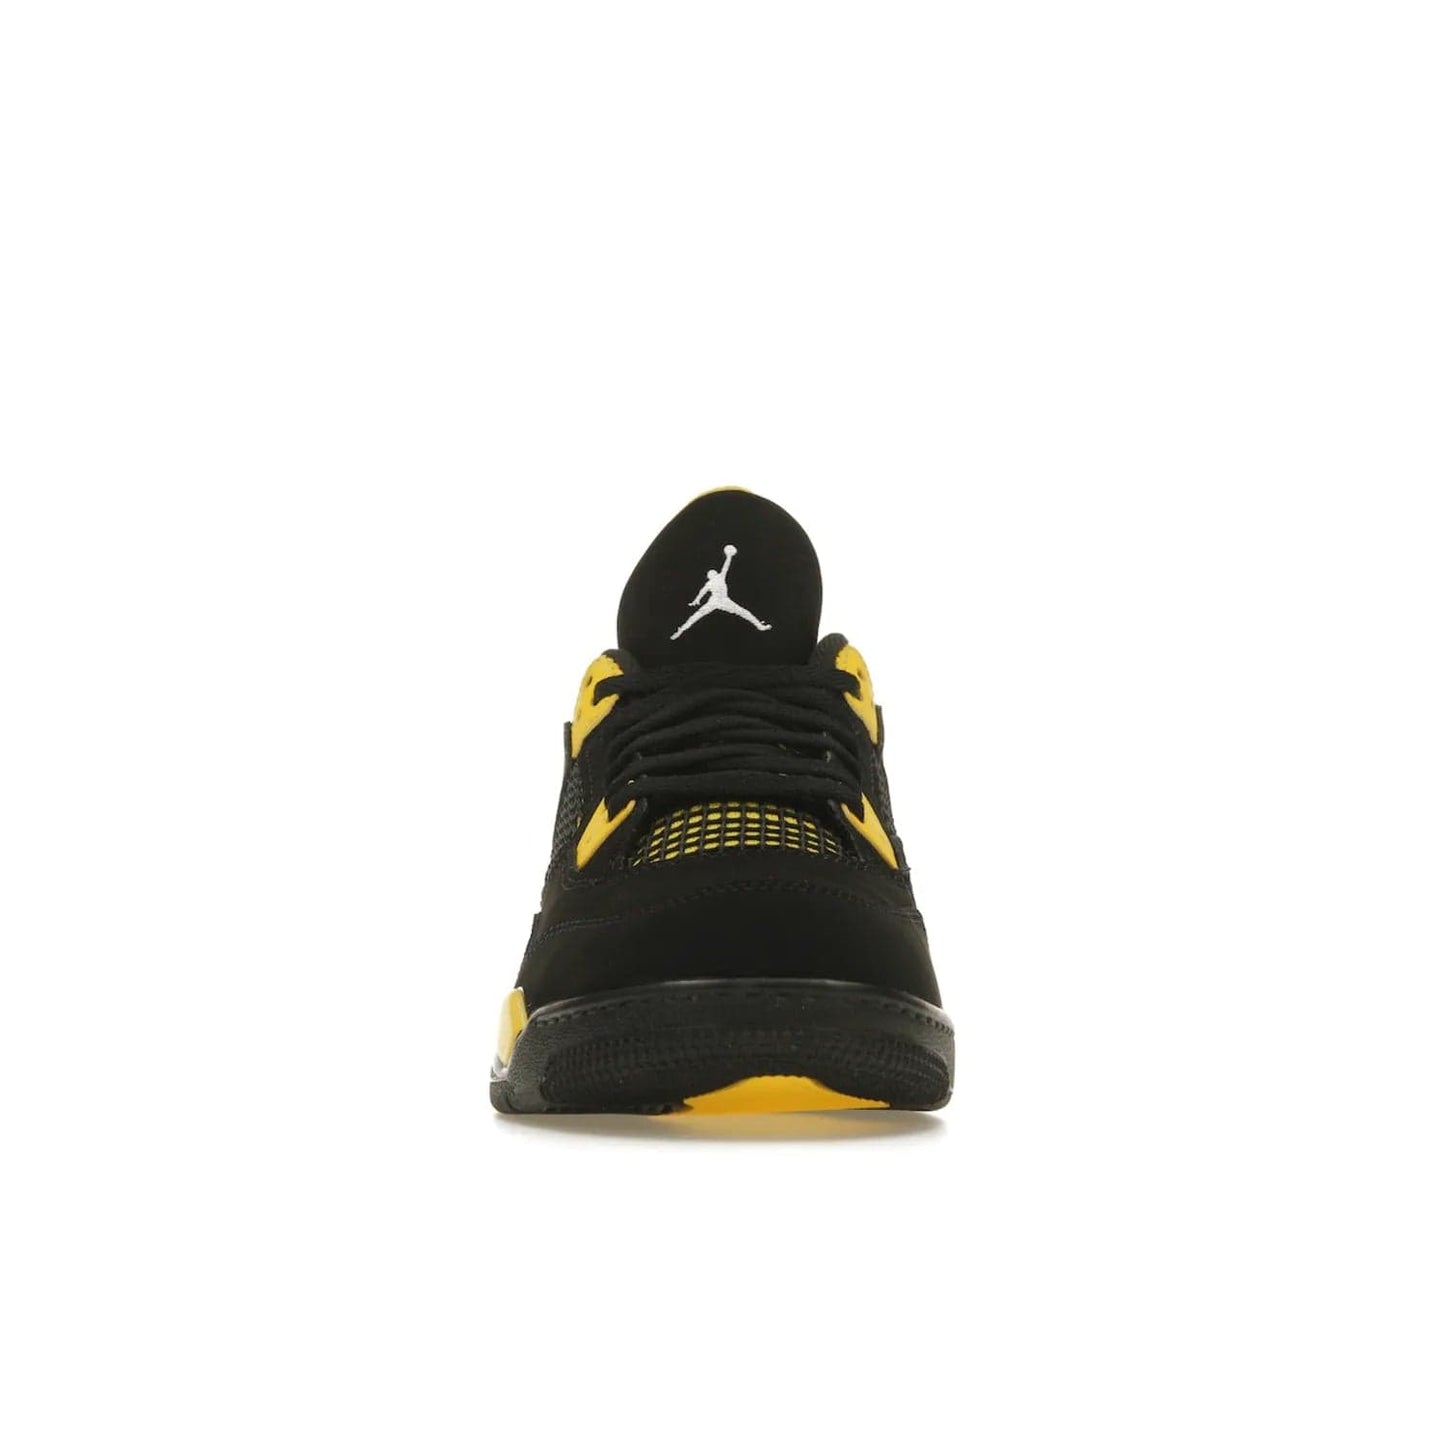 Jordan 4 Retro Thunder (2023) (PS) - Image 10 - Only at www.BallersClubKickz.com - Classic Jordan 4 Retro Thunder sneaker in Black and Tour Yellow colorway. Limited edition release expected to hit the shelves in 2023 on May 13th. Grab your pair!